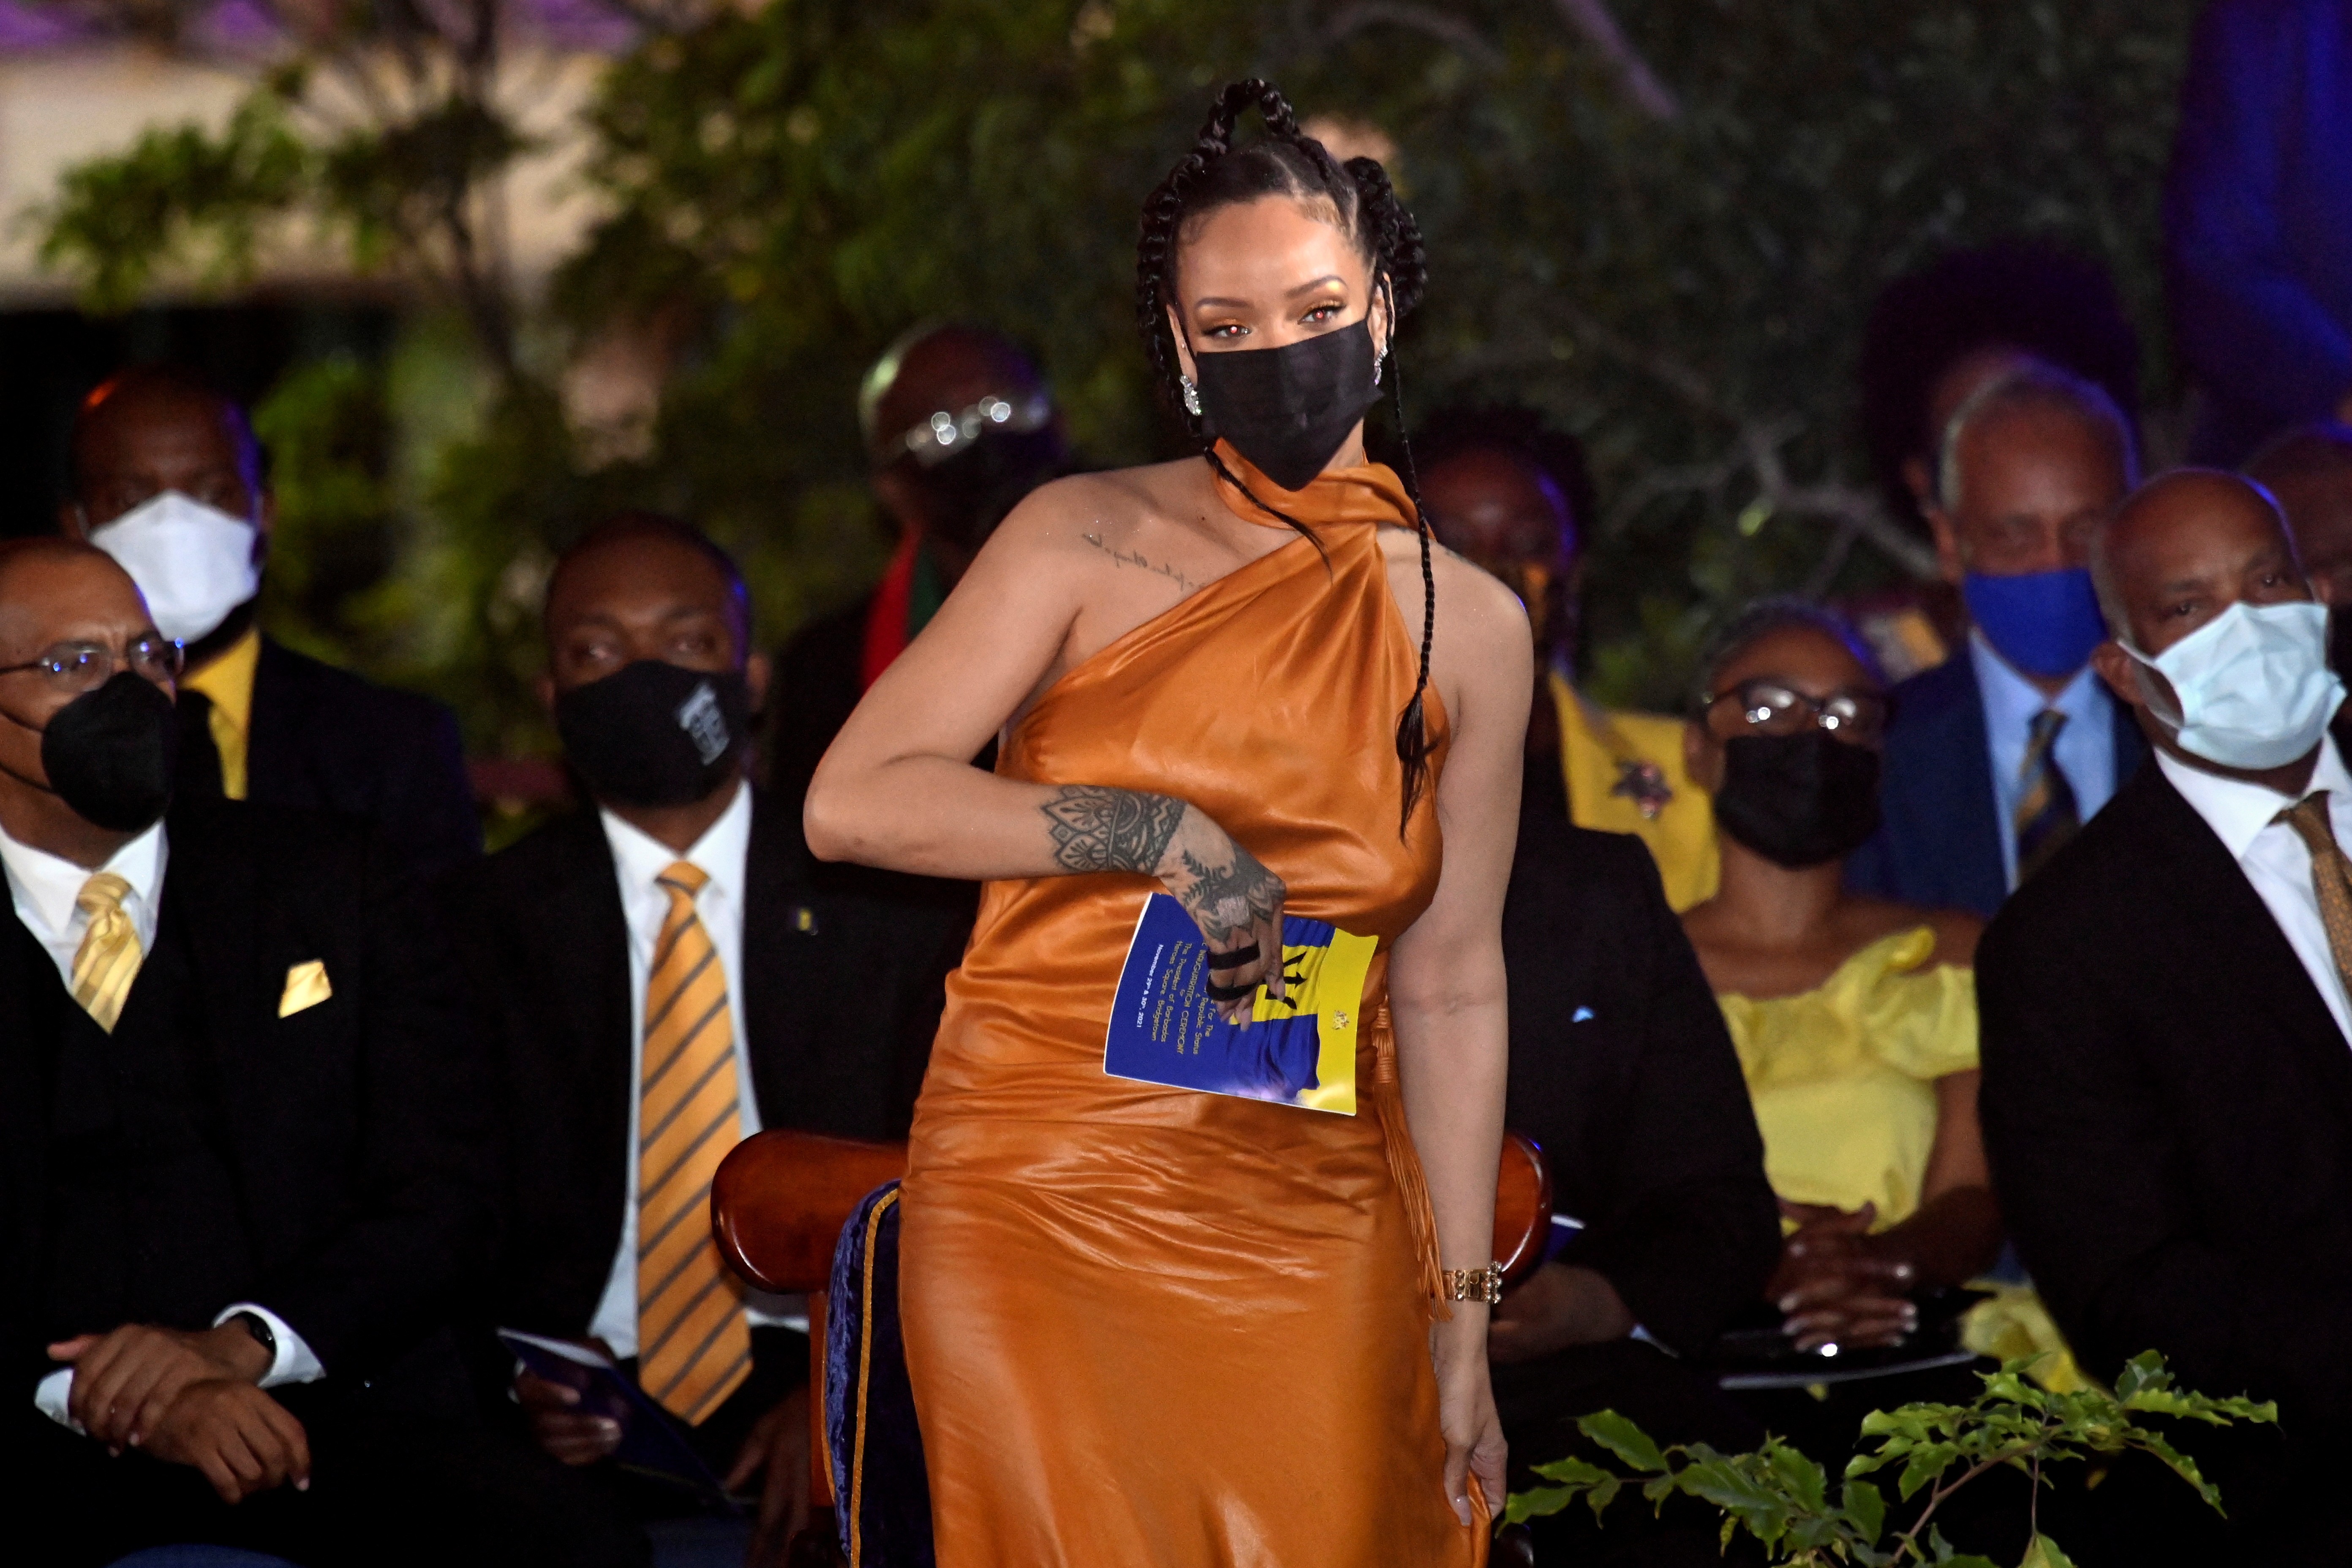 BRIDGETOWN, BARBADOS - NOVEMBER 30: Rihanna, honored as a National Hero, attends the Presidential Inauguration Ceremony at Heroes Square on November 30, 2021 in Bridgetown, Barbados. The Prince of Wales arrived in the country ahead of its transition to a  (Foto: Getty Images)